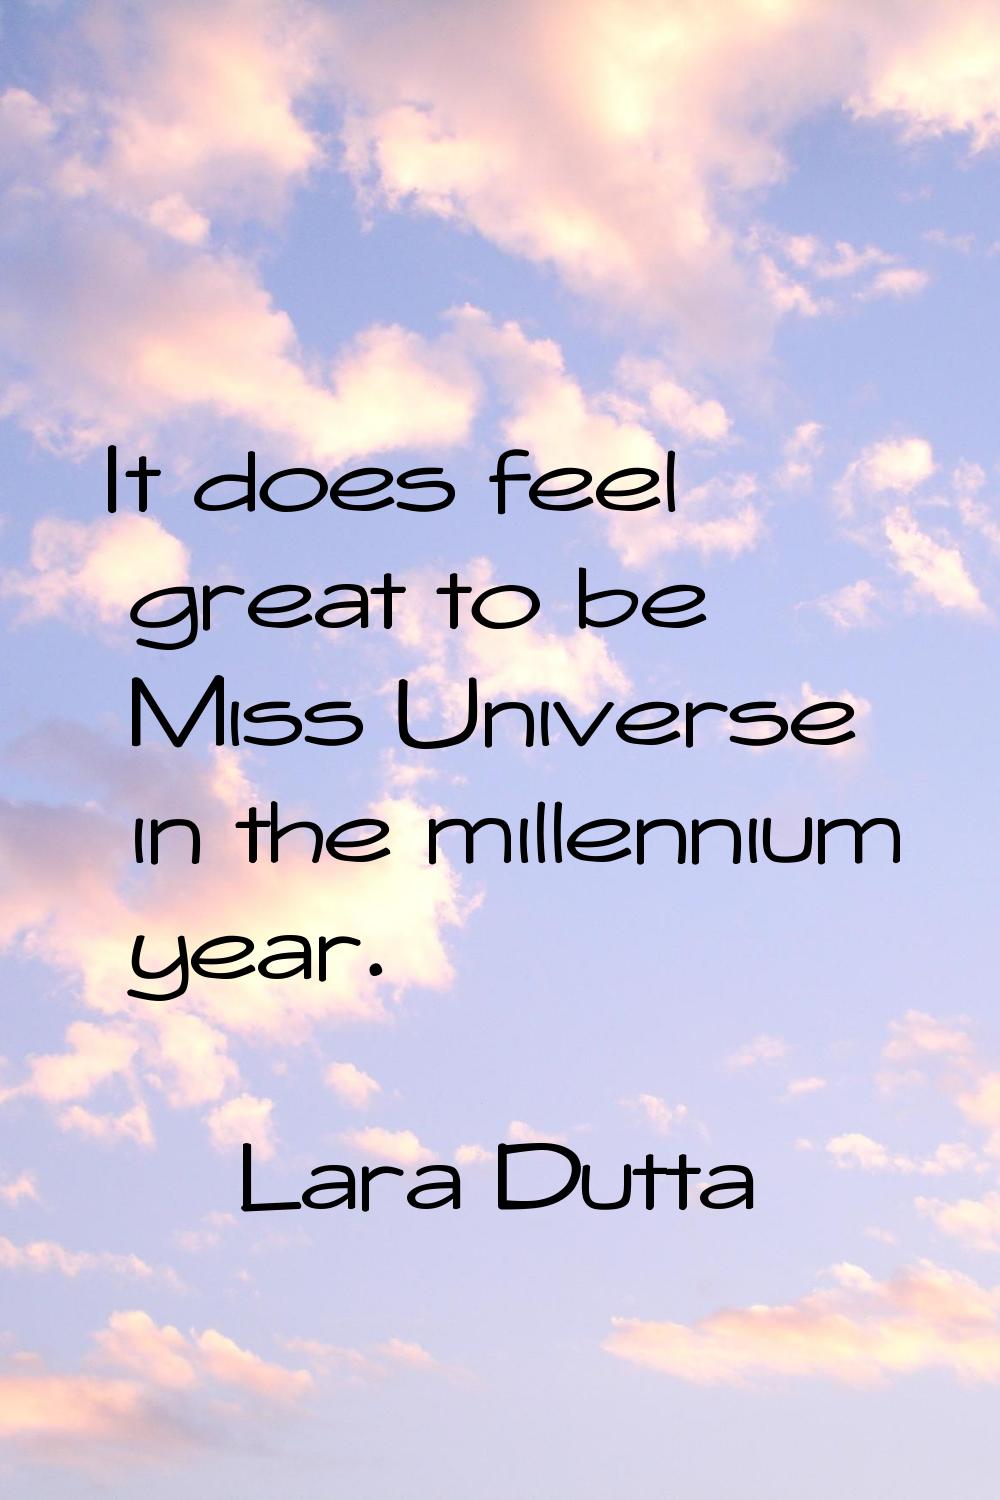 It does feel great to be Miss Universe in the millennium year.